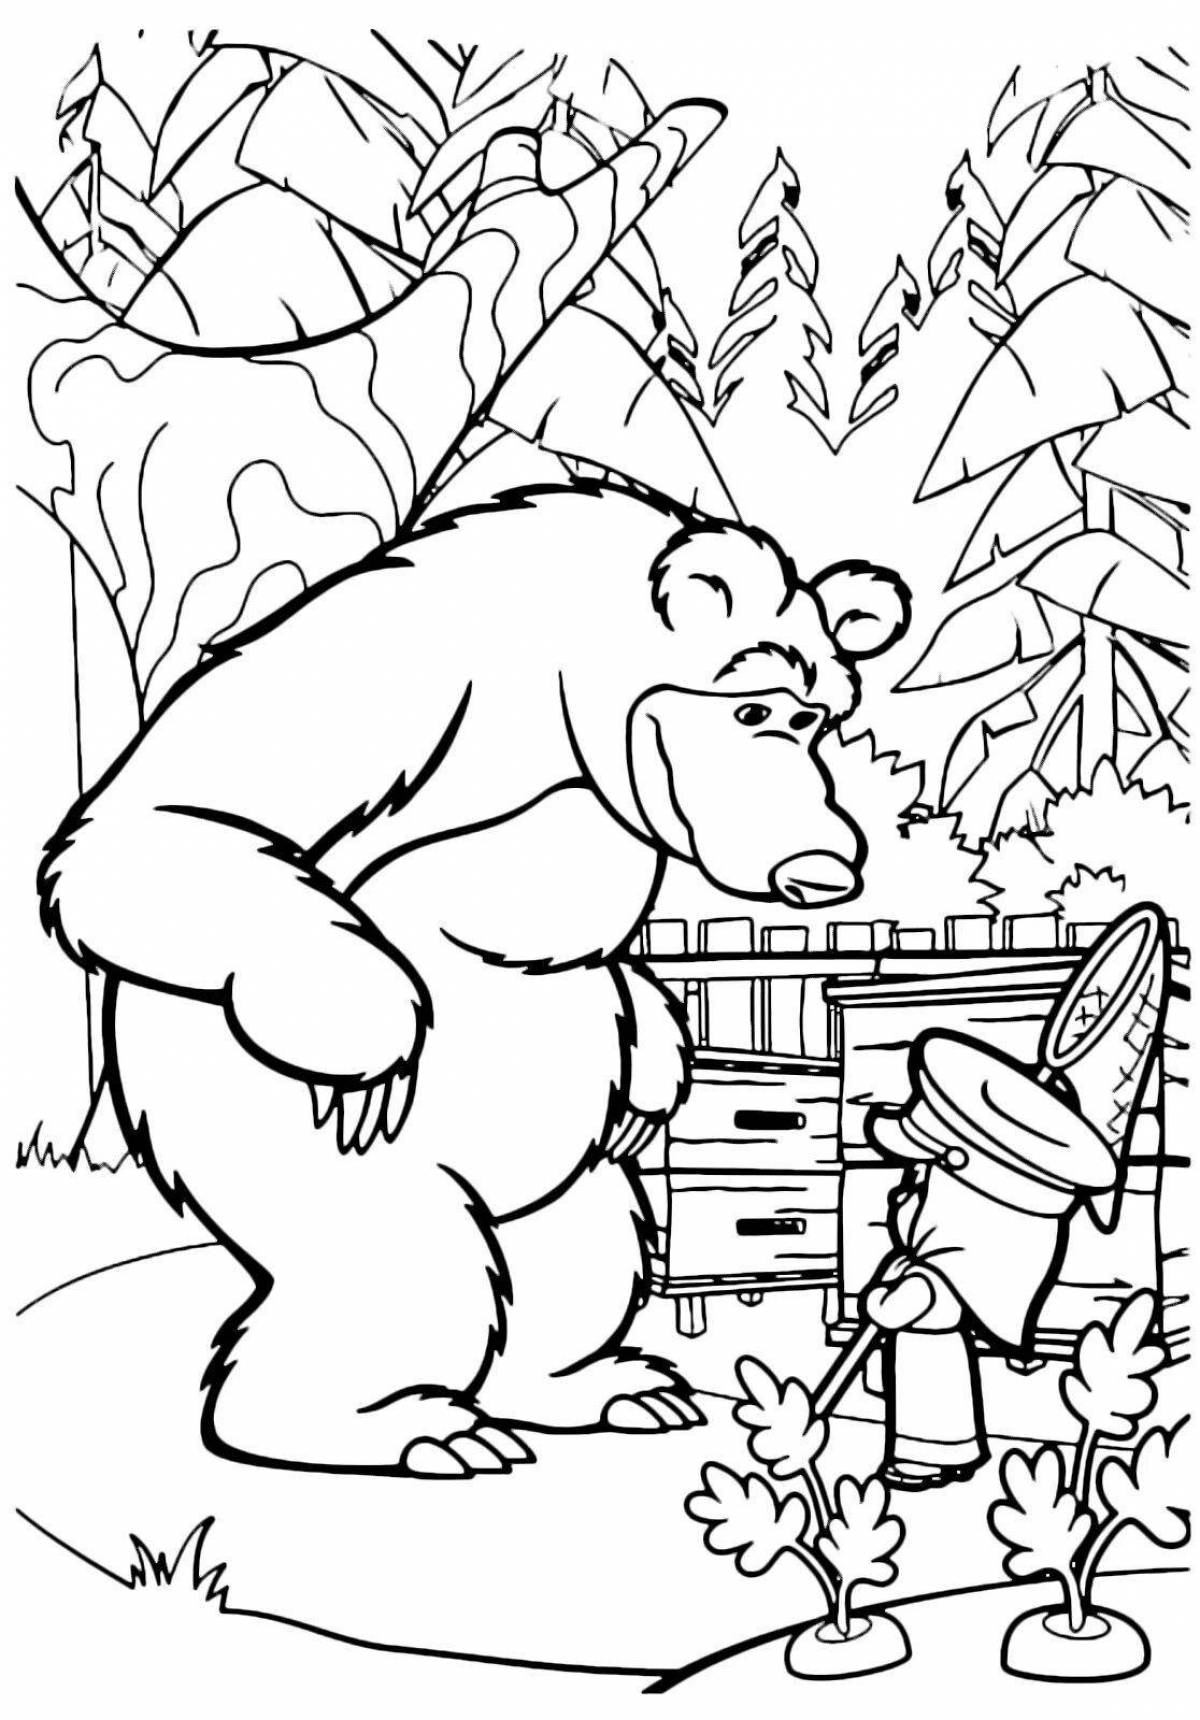 Merry Masha and the bear coloring book